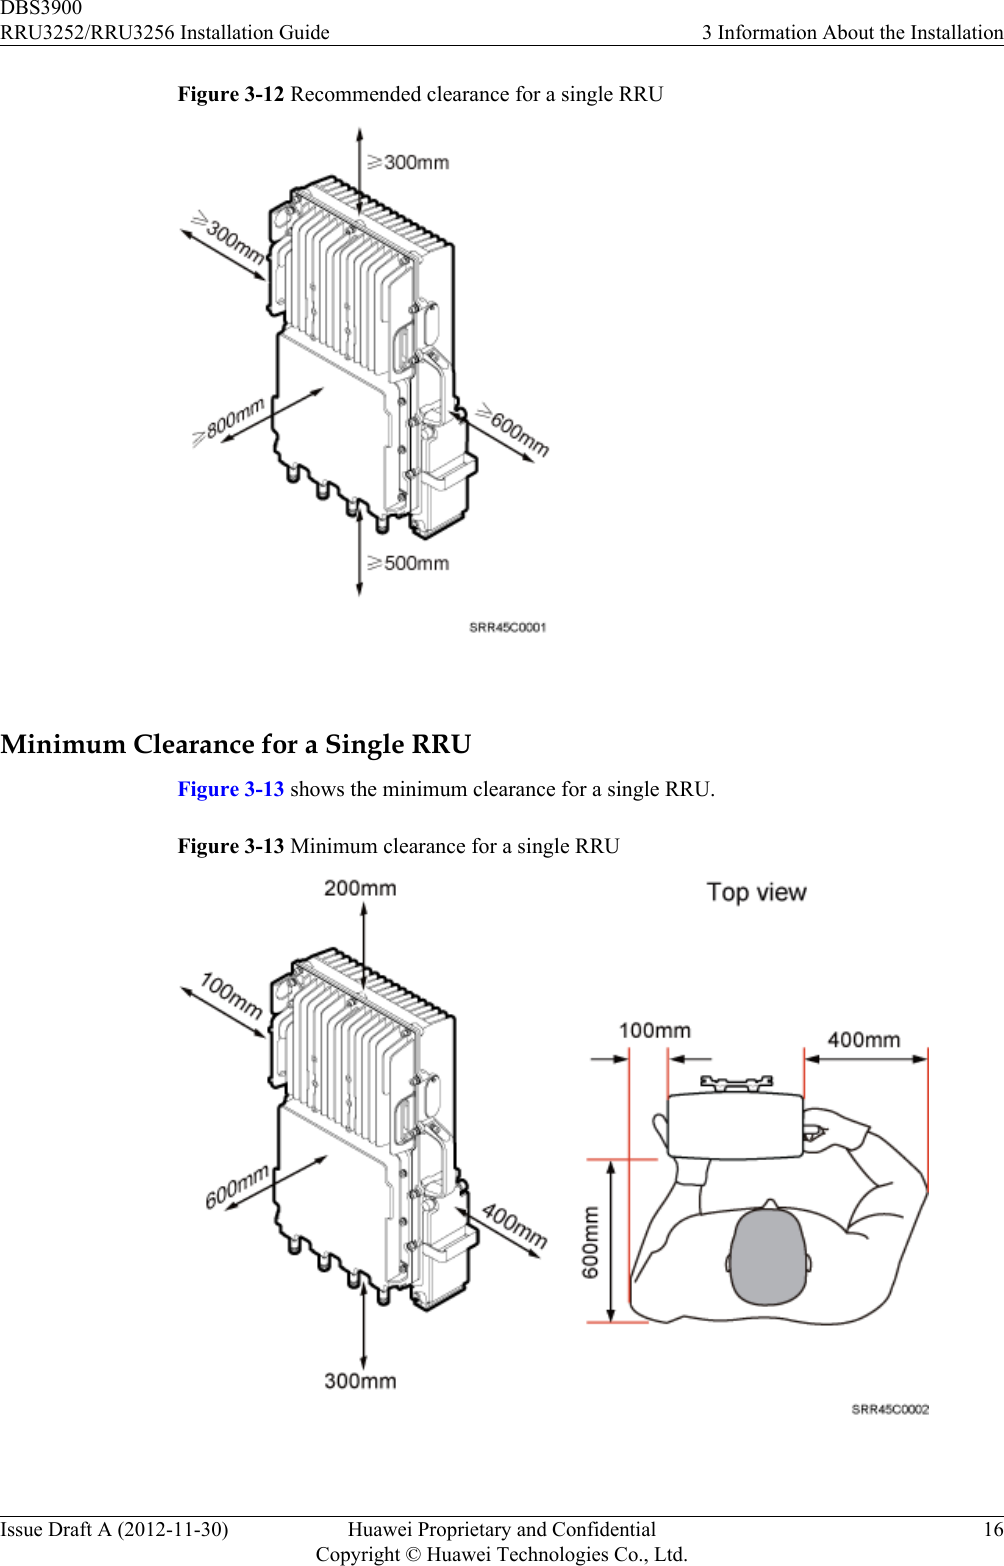 Figure 3-12 Recommended clearance for a single RRU Minimum Clearance for a Single RRUFigure 3-13 shows the minimum clearance for a single RRU.Figure 3-13 Minimum clearance for a single RRU DBS3900RRU3252/RRU3256 Installation Guide 3 Information About the InstallationIssue Draft A (2012-11-30) Huawei Proprietary and ConfidentialCopyright © Huawei Technologies Co., Ltd.16